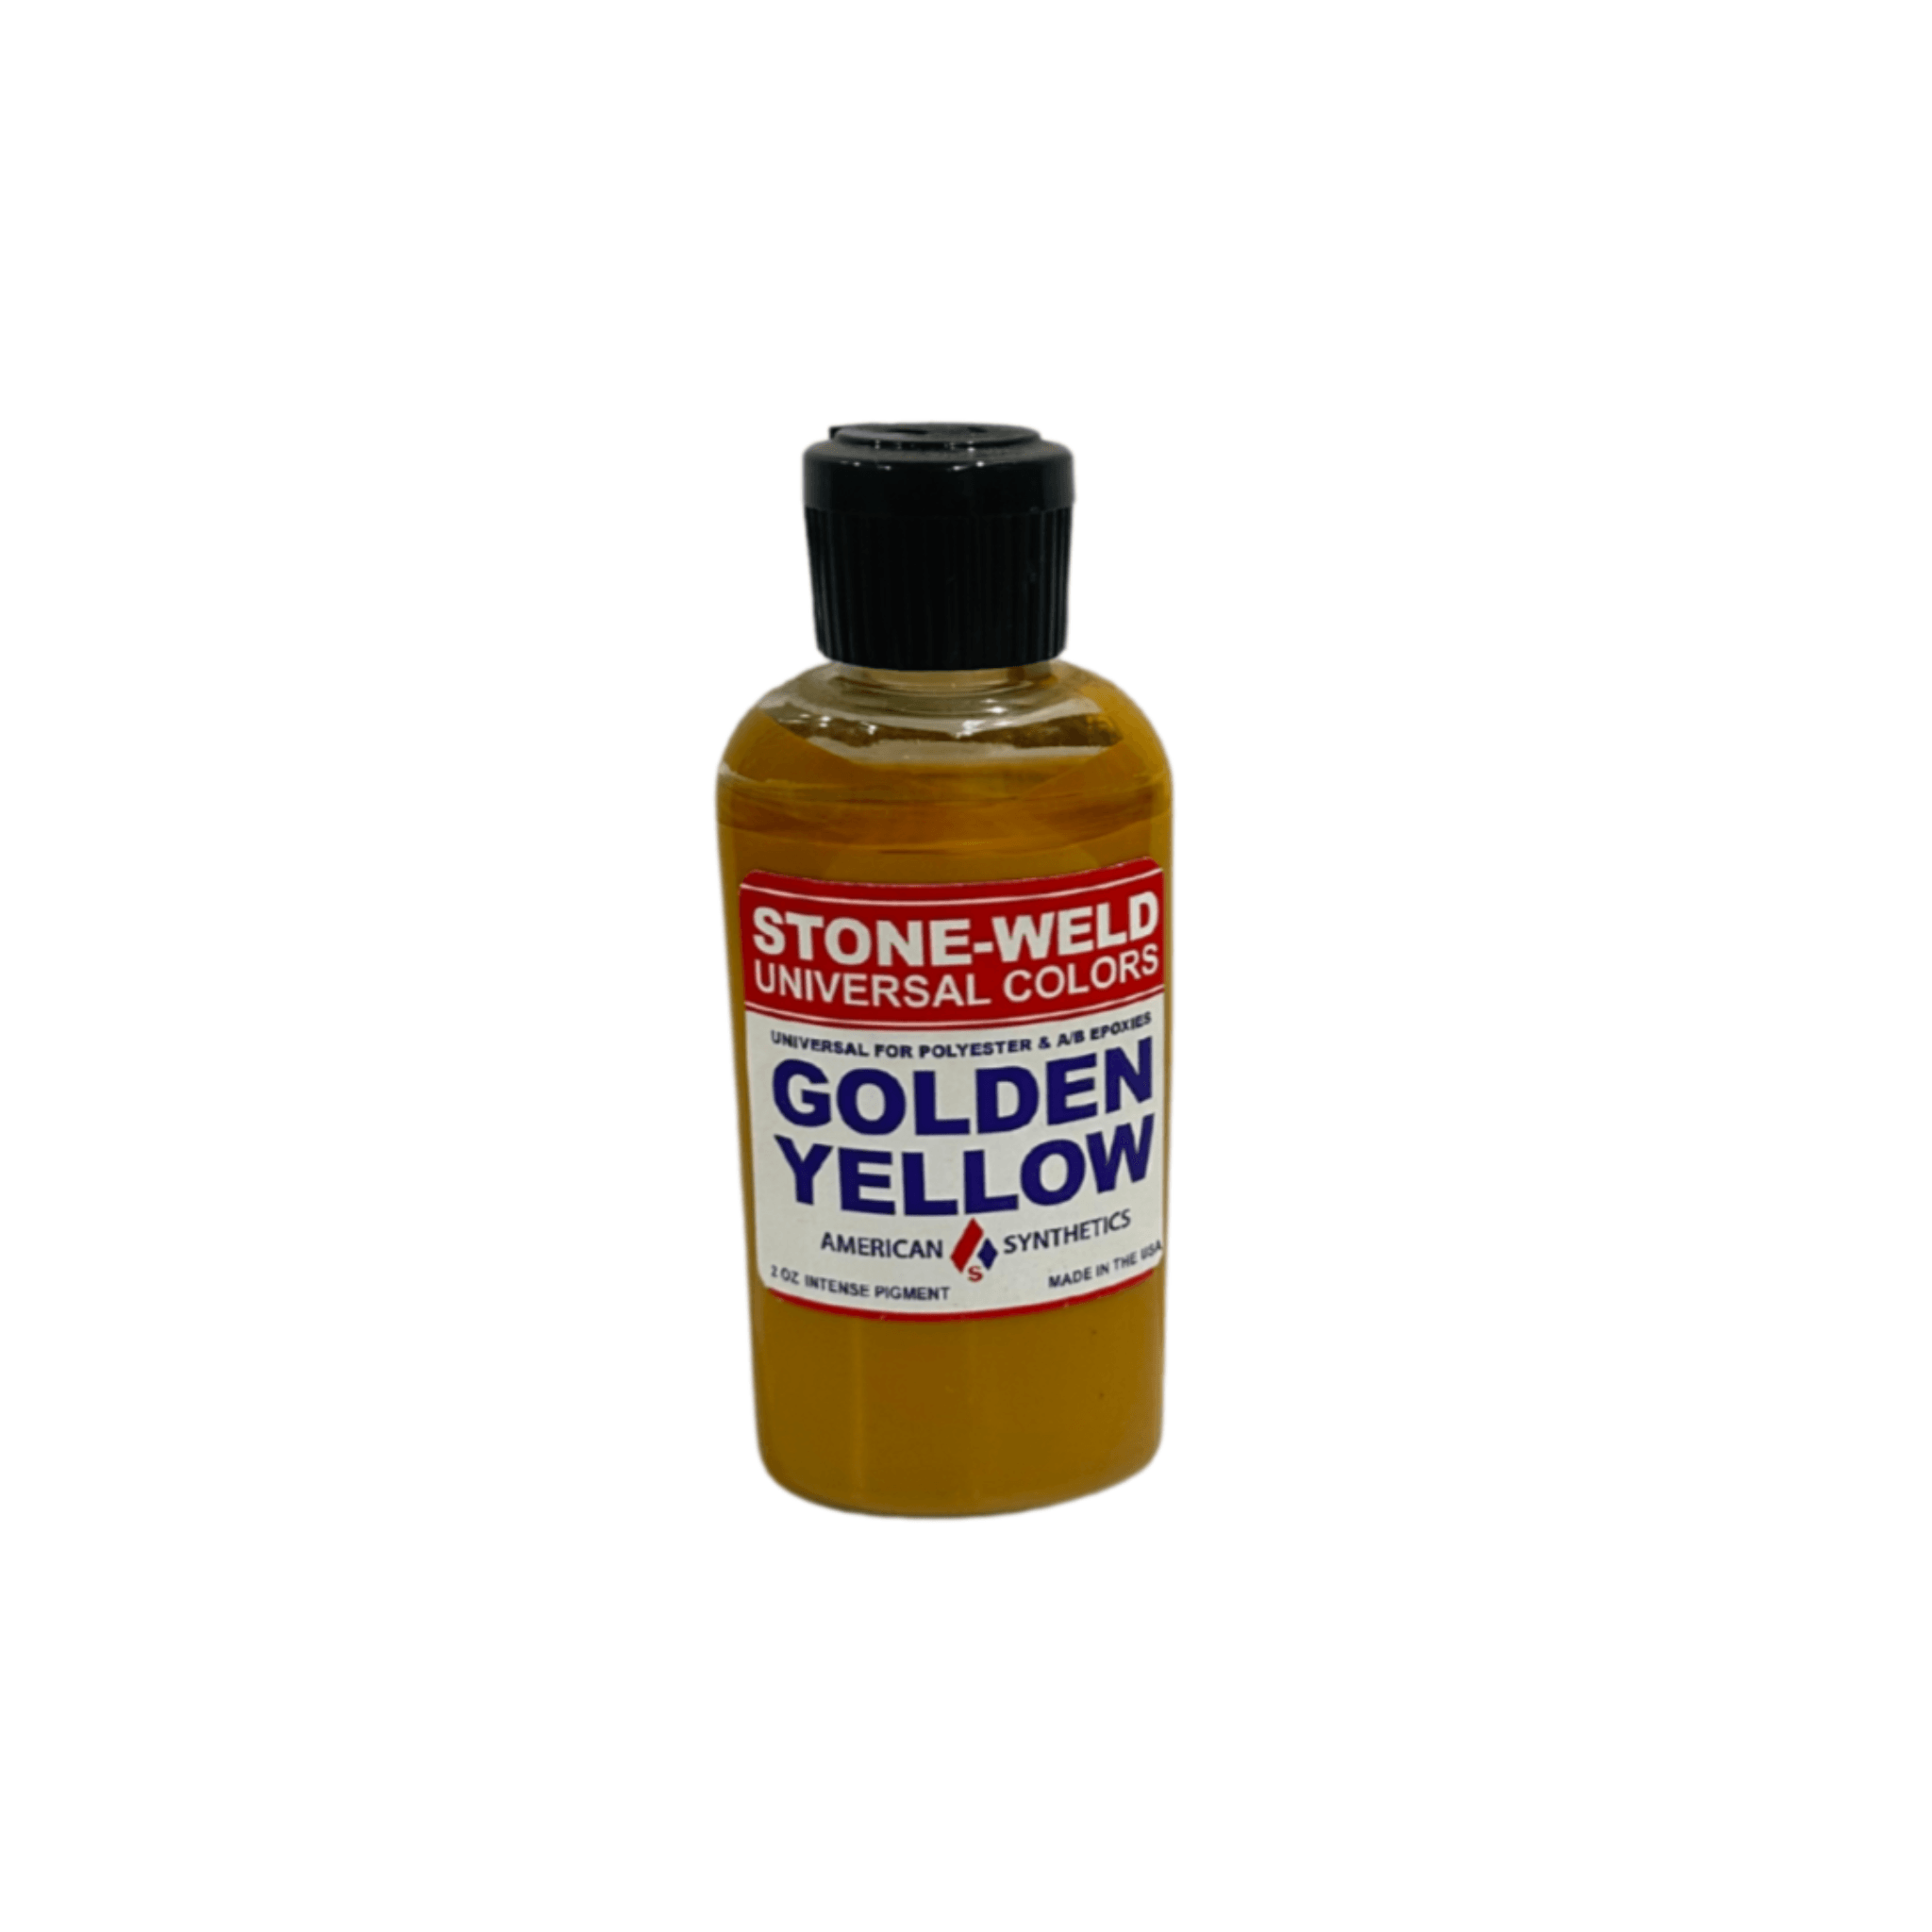 Stone-Weld 2 oz. Universal Color, Golden Yellow - Direct Stone Tool Supply, Inc